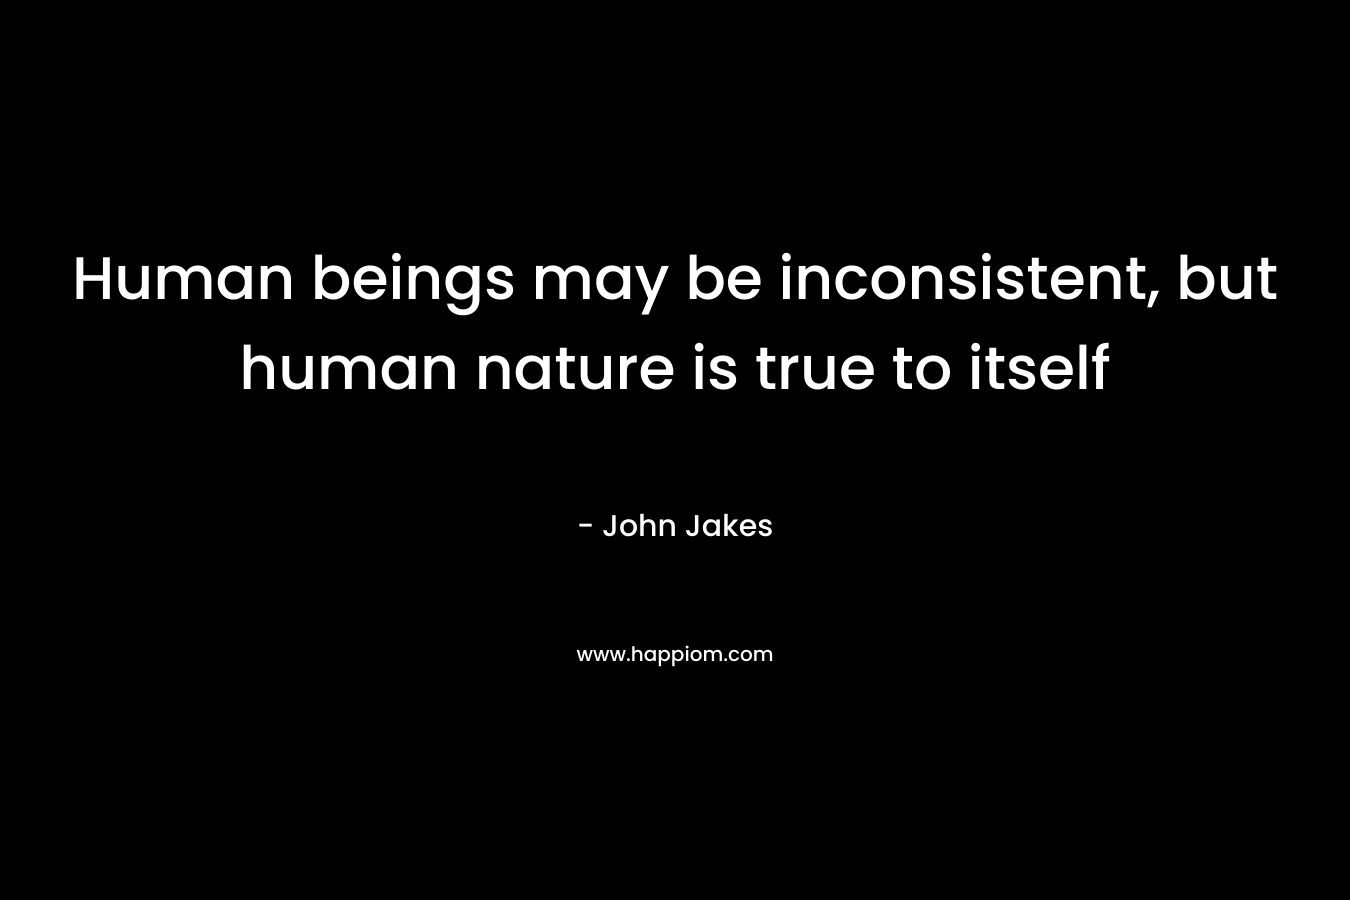 Human beings may be inconsistent, but human nature is true to itself